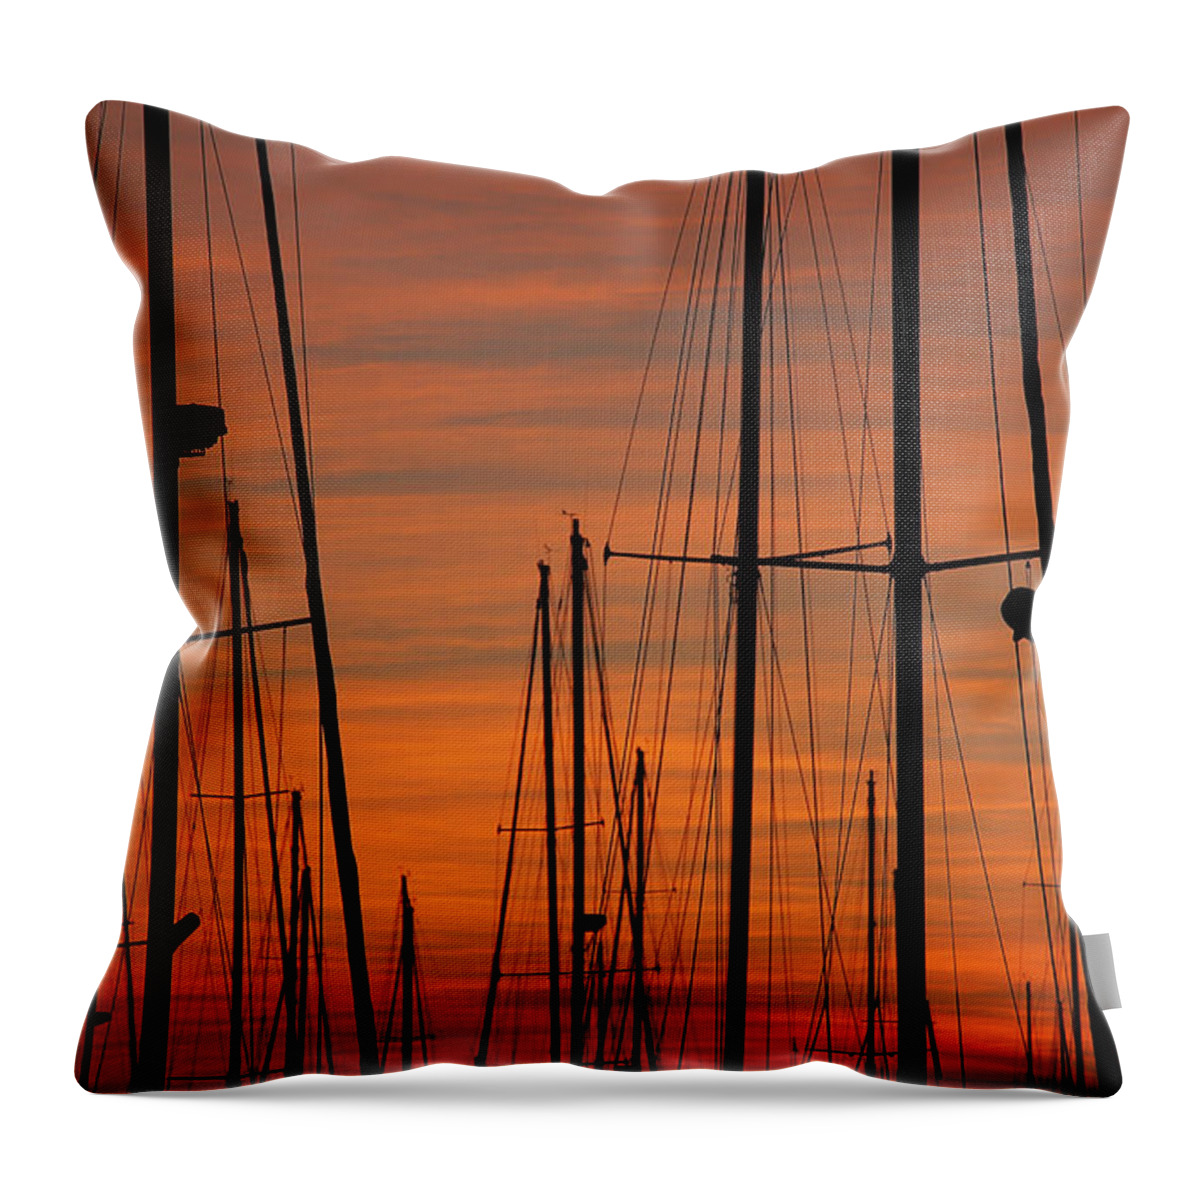 Masts Throw Pillow featuring the photograph Masts At Sunset by Robert Woodward